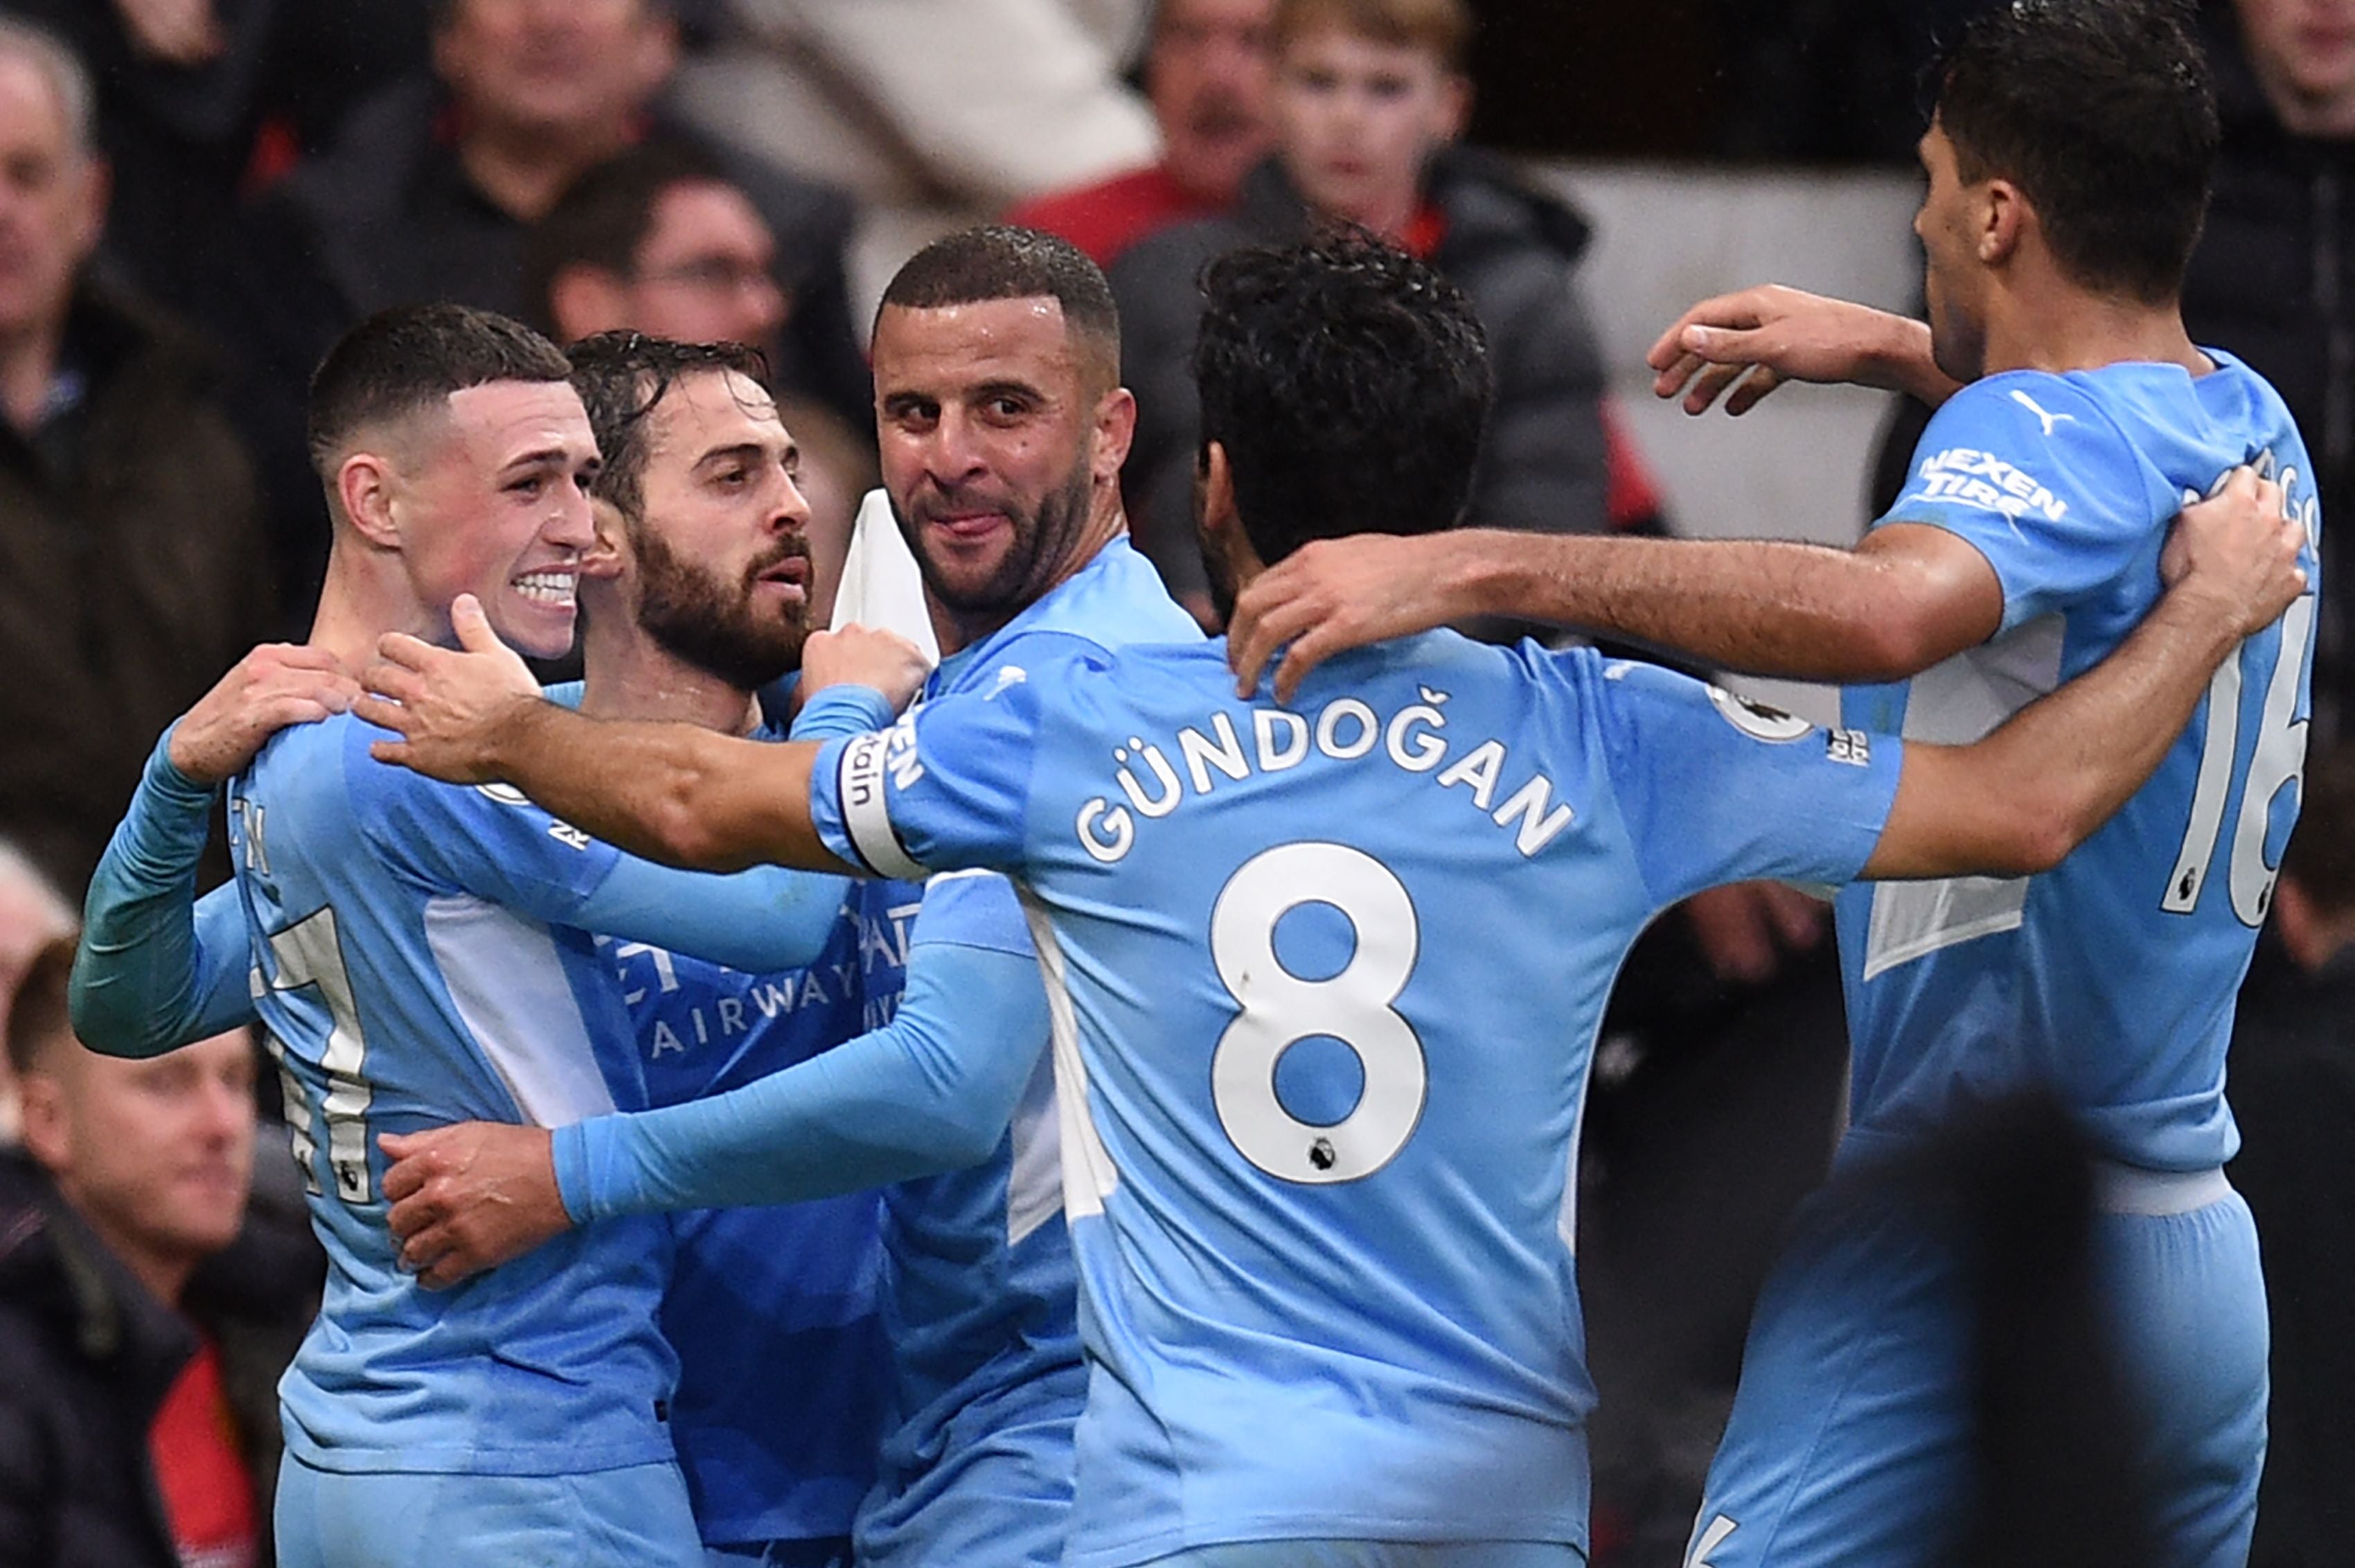 Man City proved far too good for United